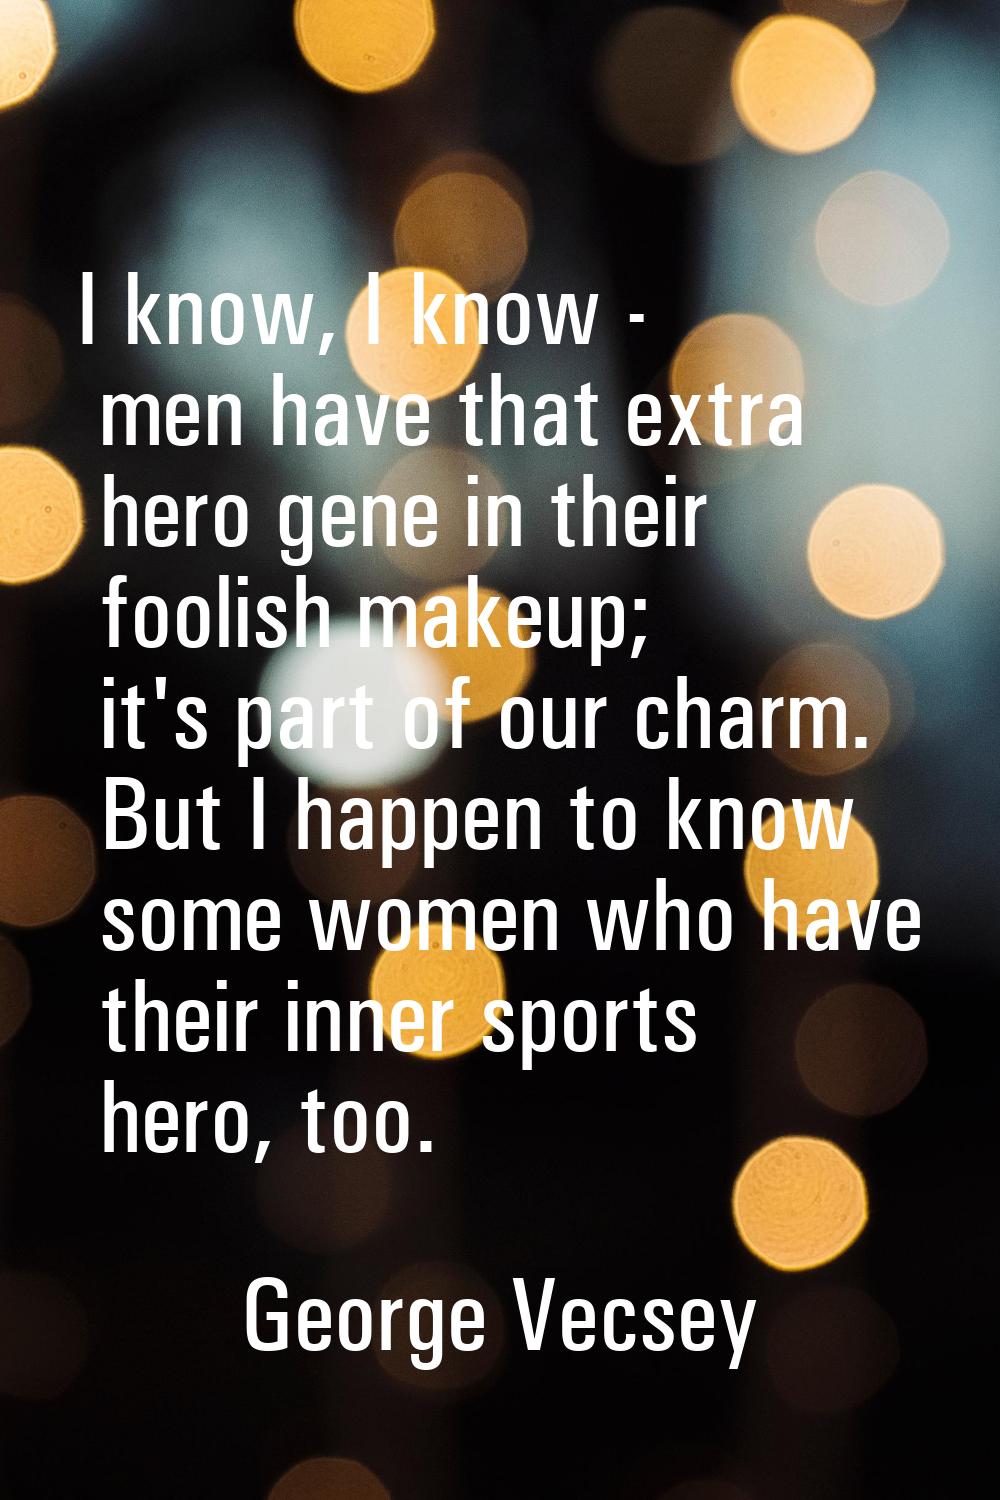 I know, I know - men have that extra hero gene in their foolish makeup; it's part of our charm. But